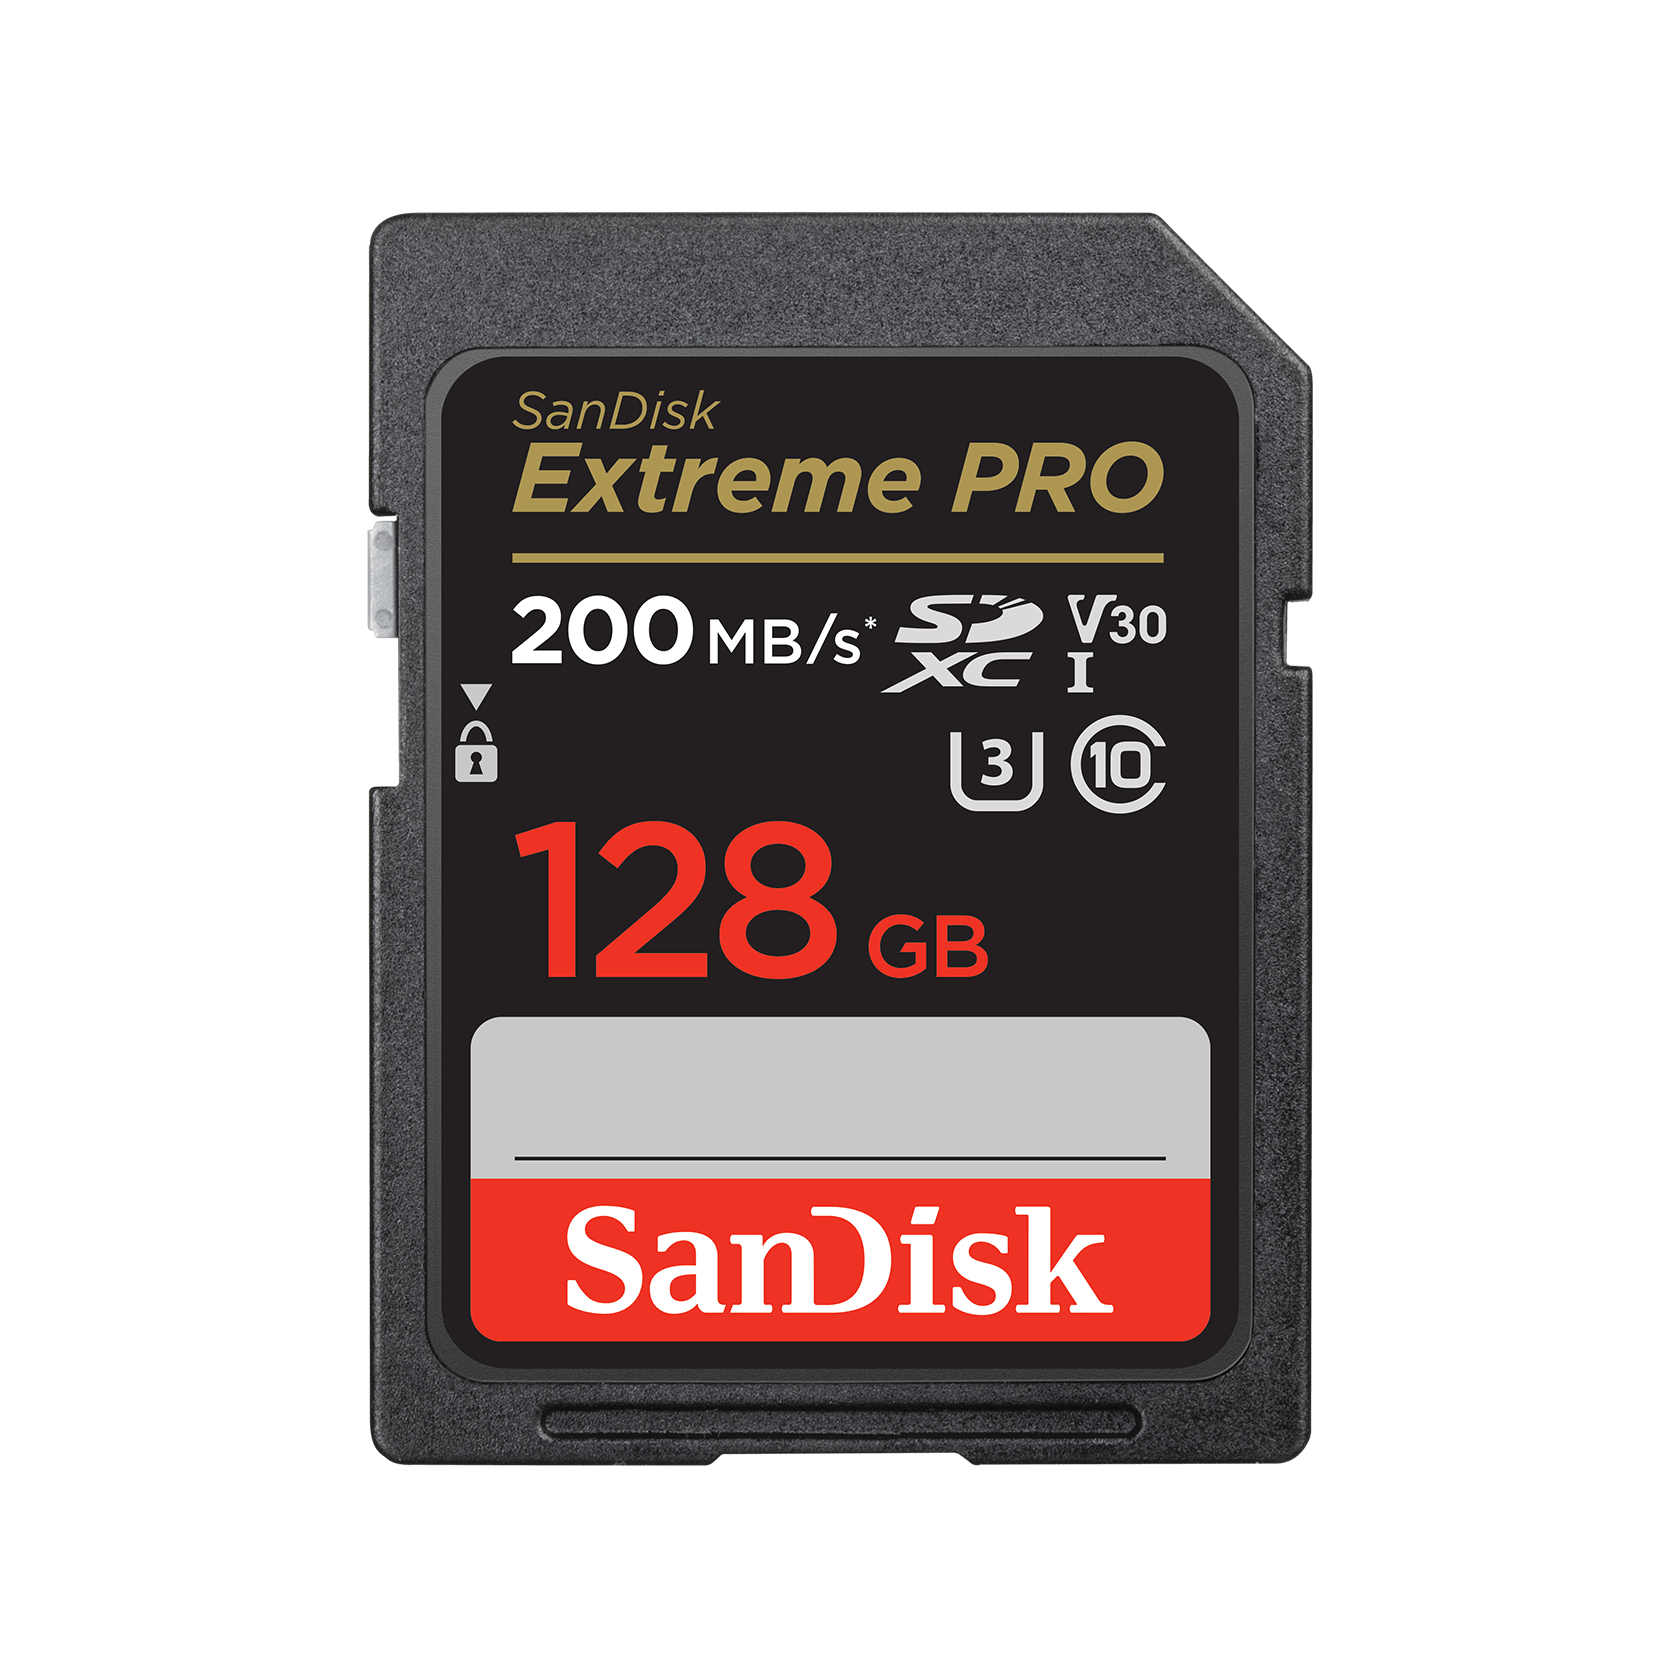 SanDisk Extreme PROÂ® SDHCâ„¢ And SDXCâ„¢ UHS-I Memory Card - 128GB - SDSDXXD-128G-GN4IN